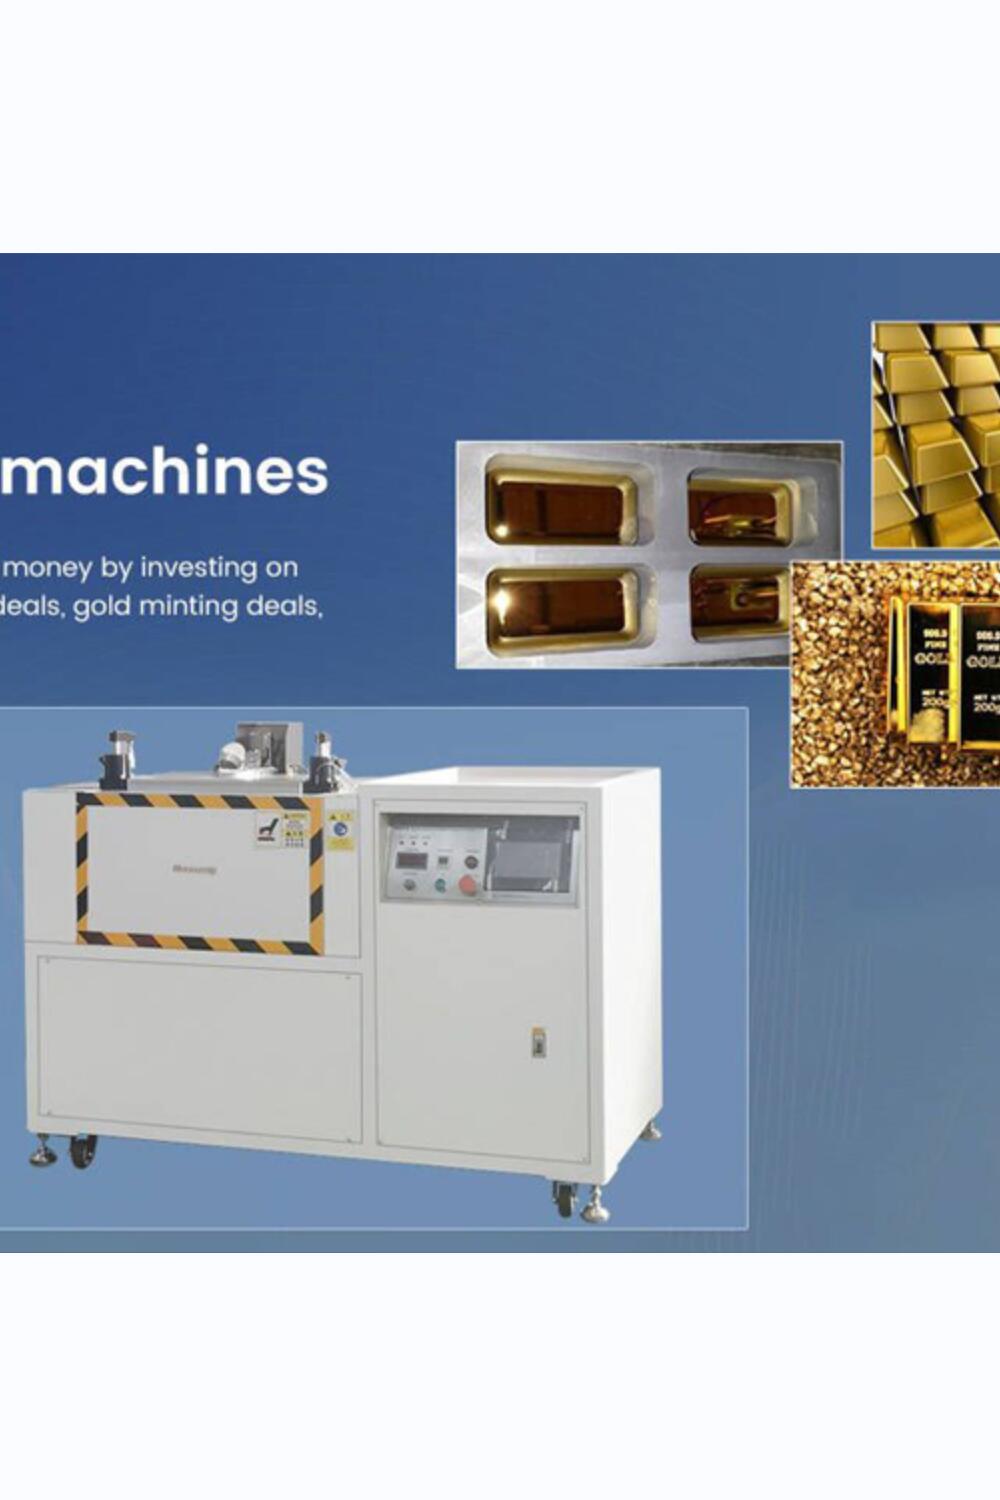 What are the jewelry processing equipment available?